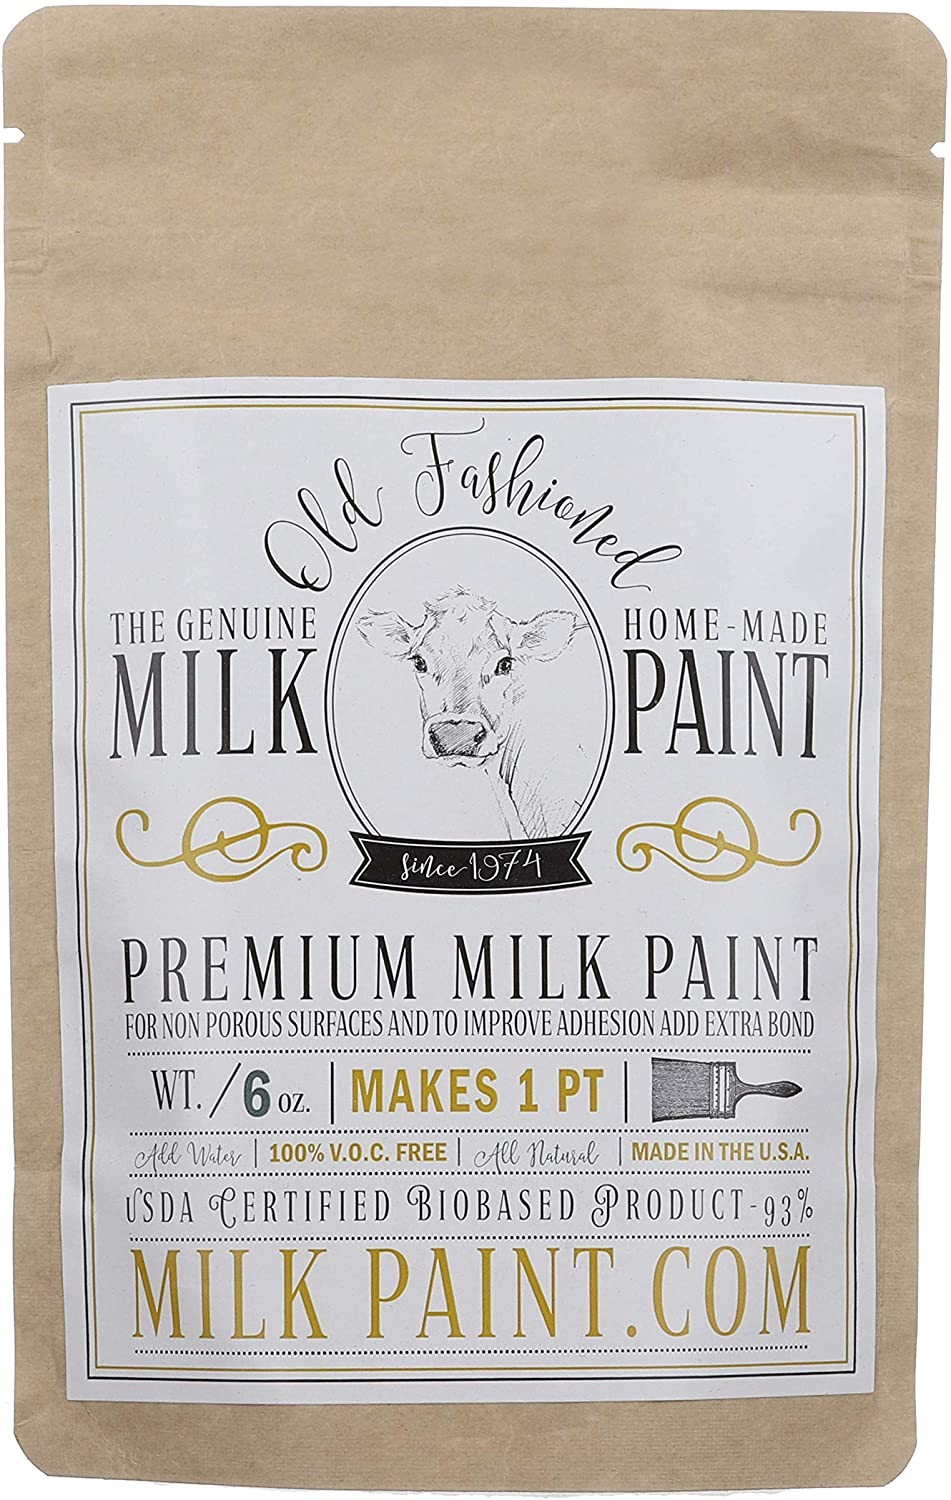 Old fashioned milk paint